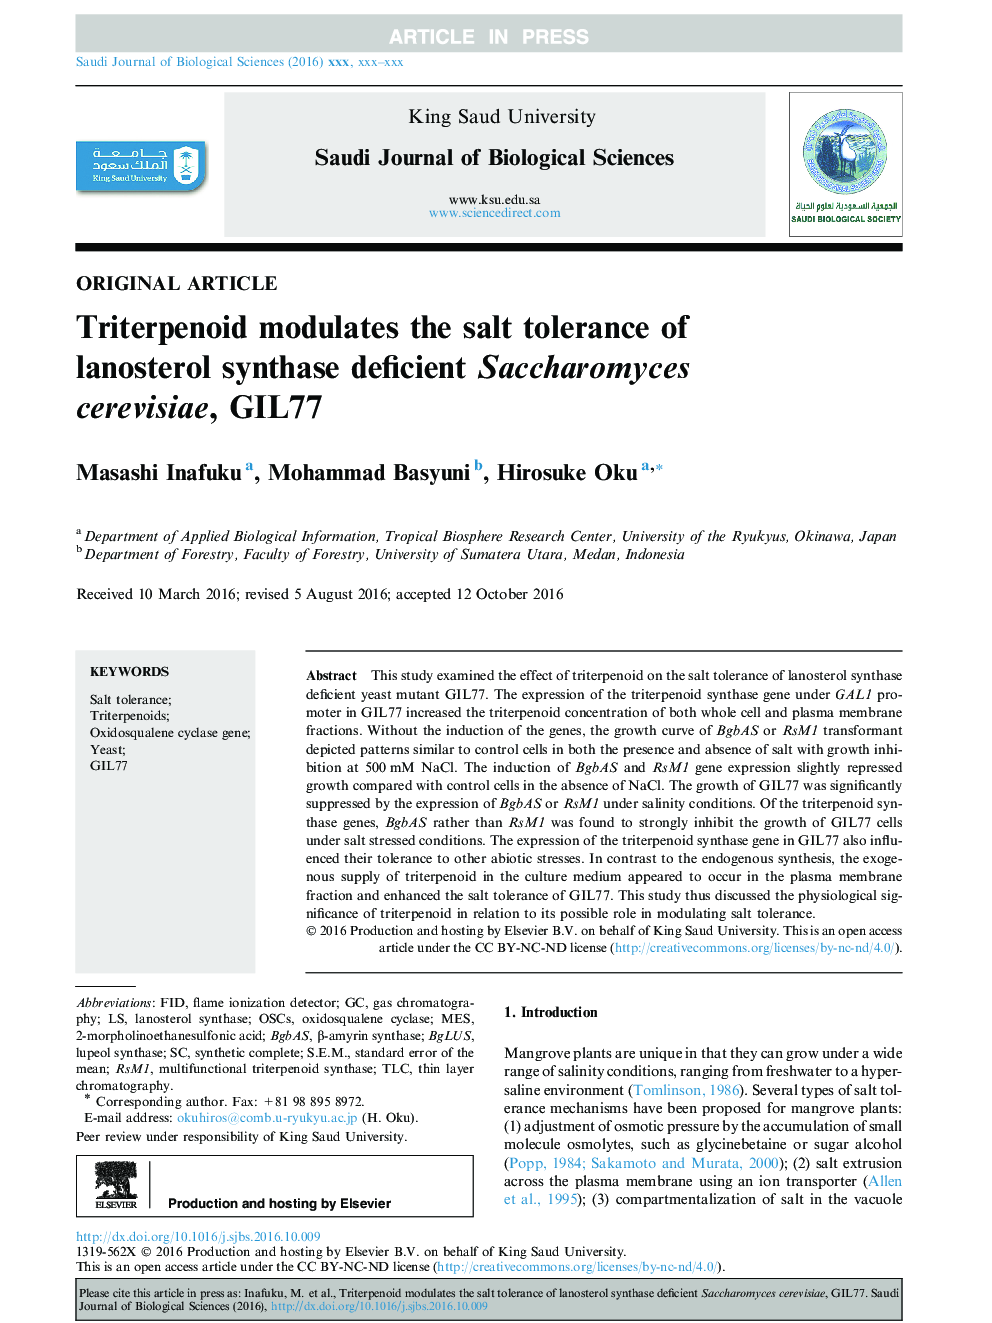 Triterpenoid modulates the salt tolerance of lanosterol synthase deficient Saccharomyces cerevisiae, GIL77